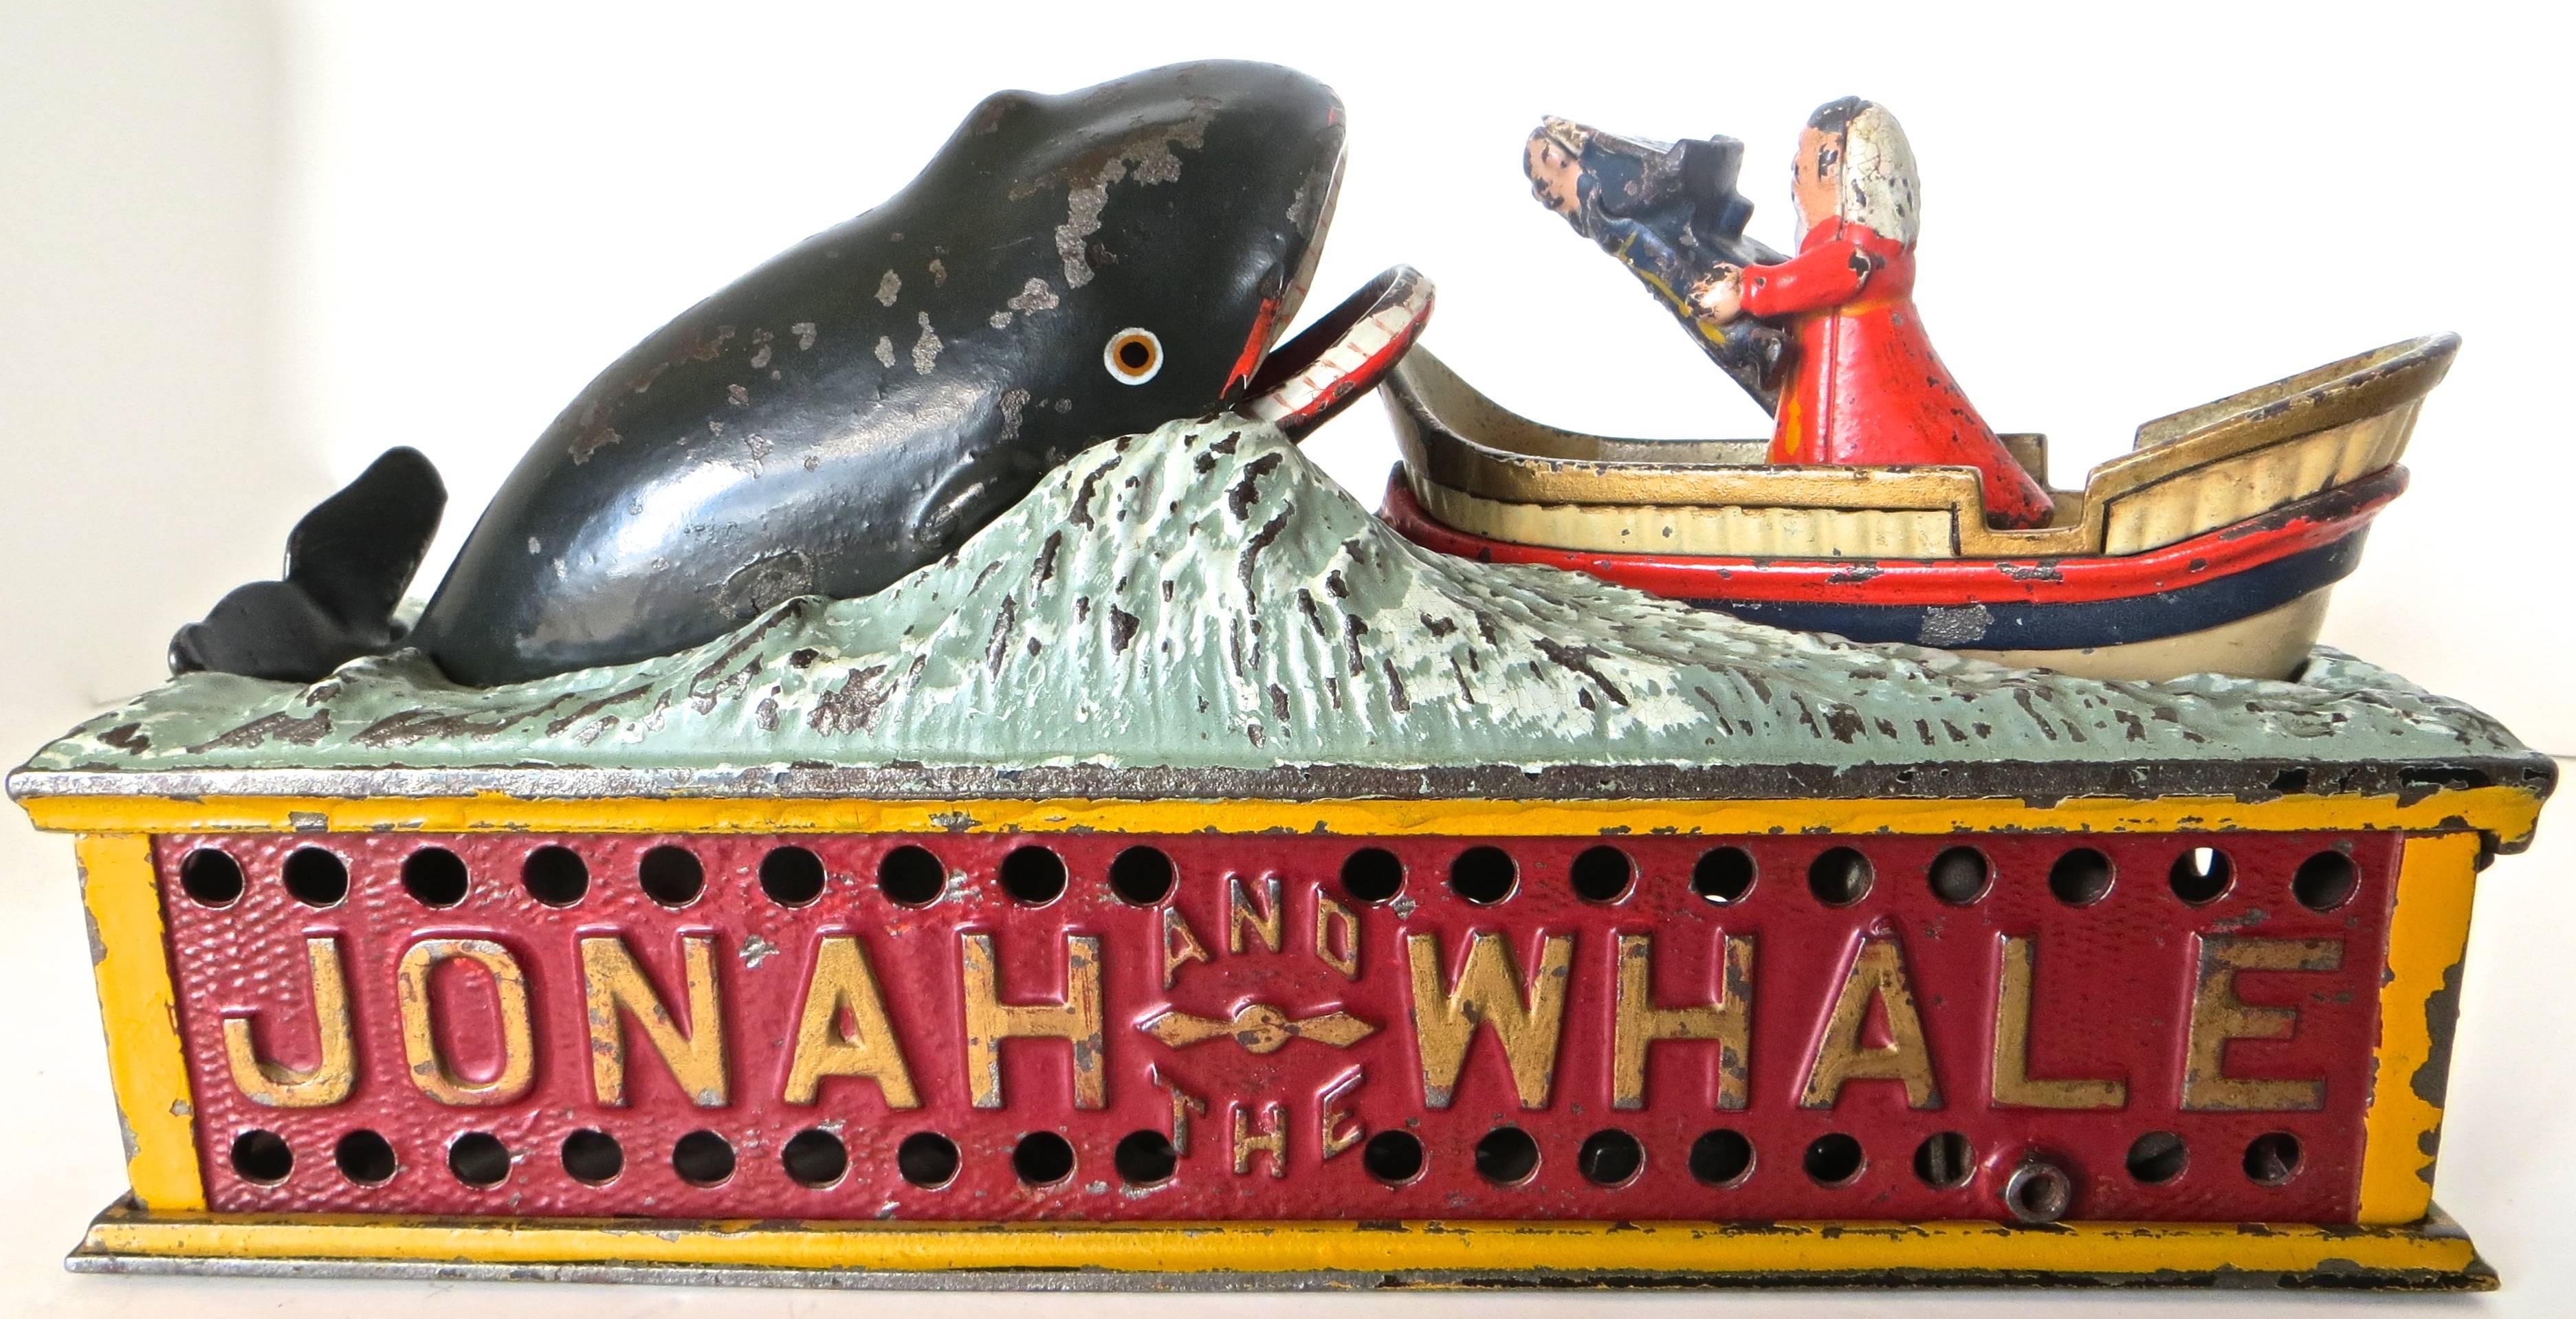 This mechanical bank made of cast iron has broad based appeal and is sought after by collectors of Americana, in addition to those who seek toys and mechanical banks. 